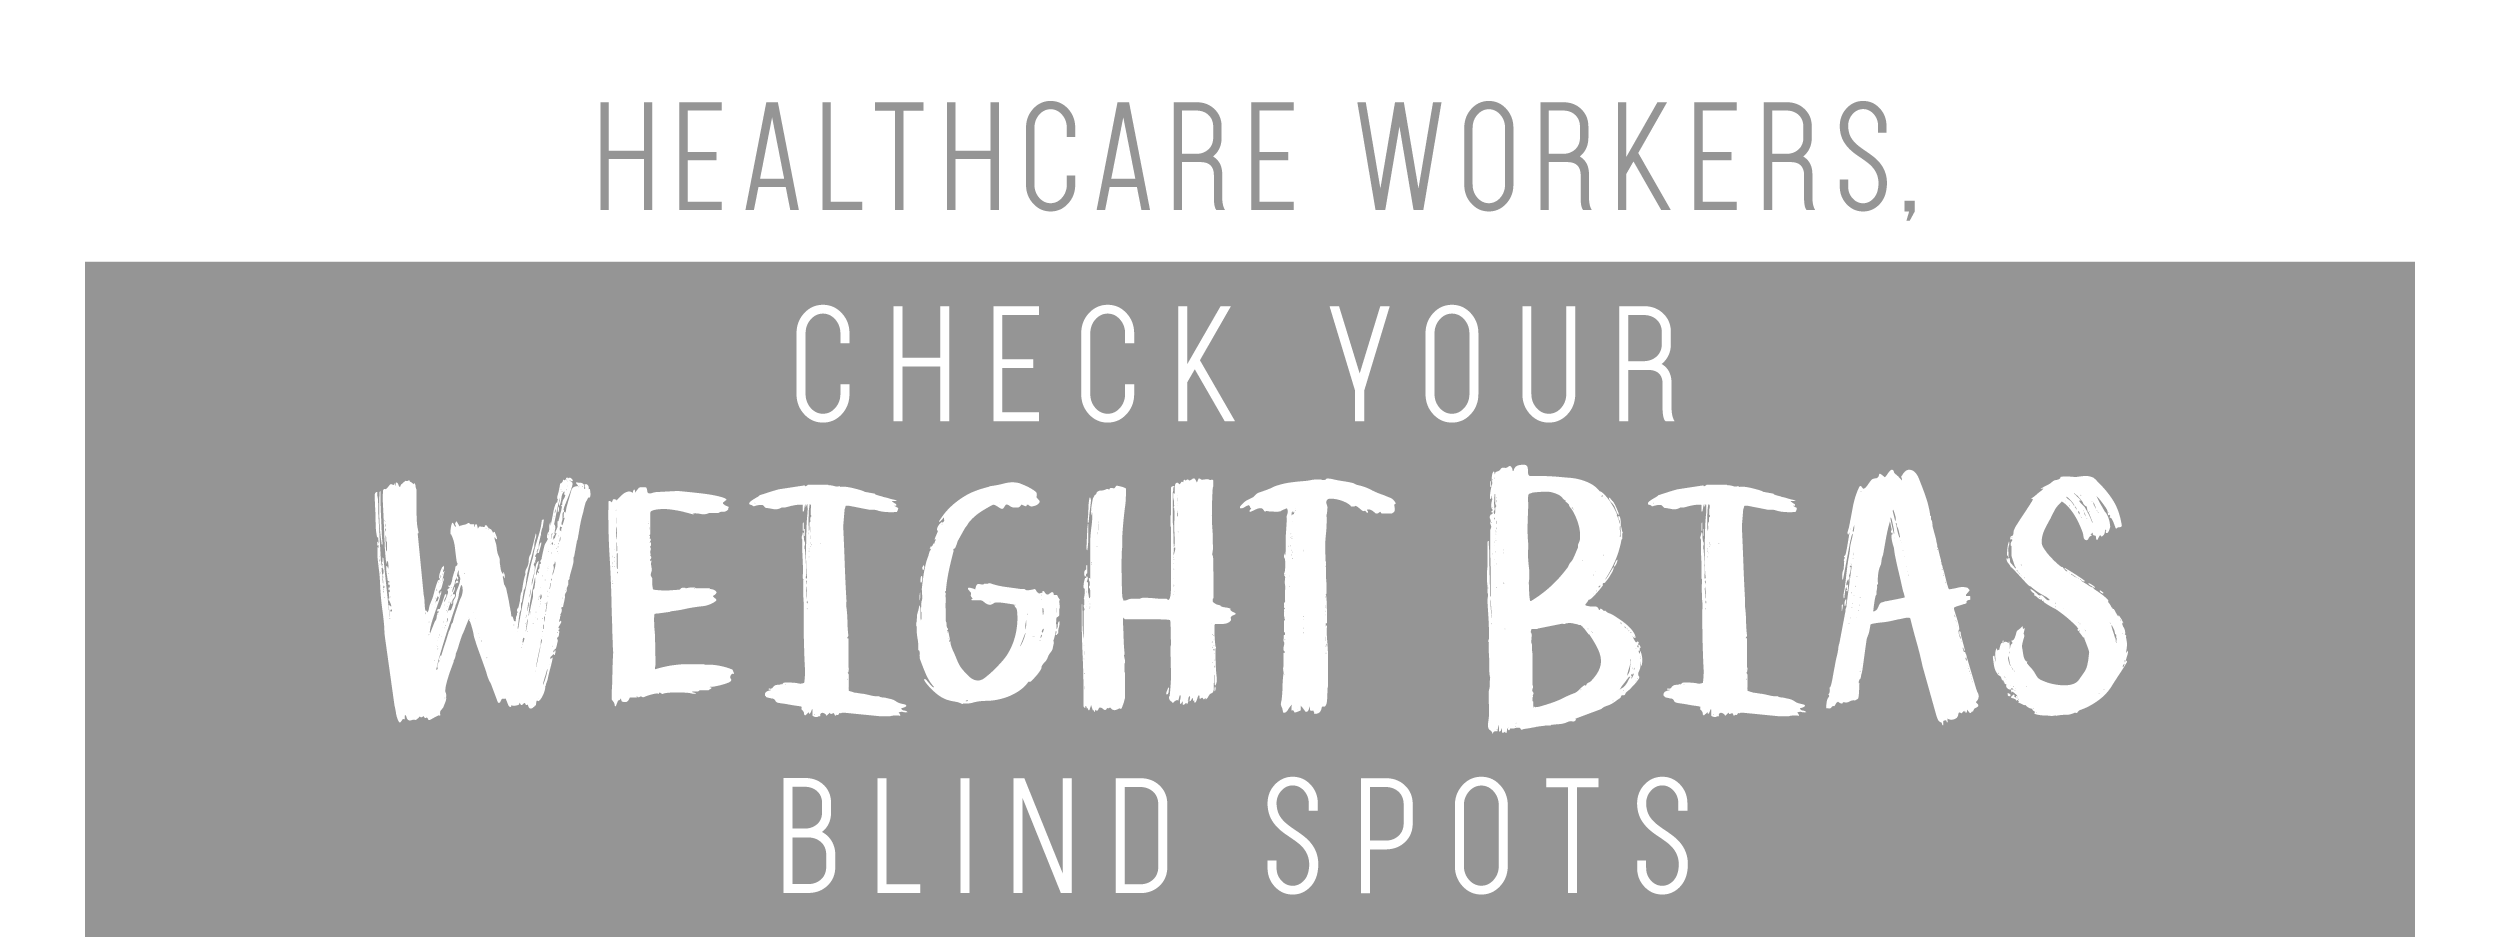 Text image advising healthcare workers to "check your weight bias blind spots" in bold, contrasting grayscale font.